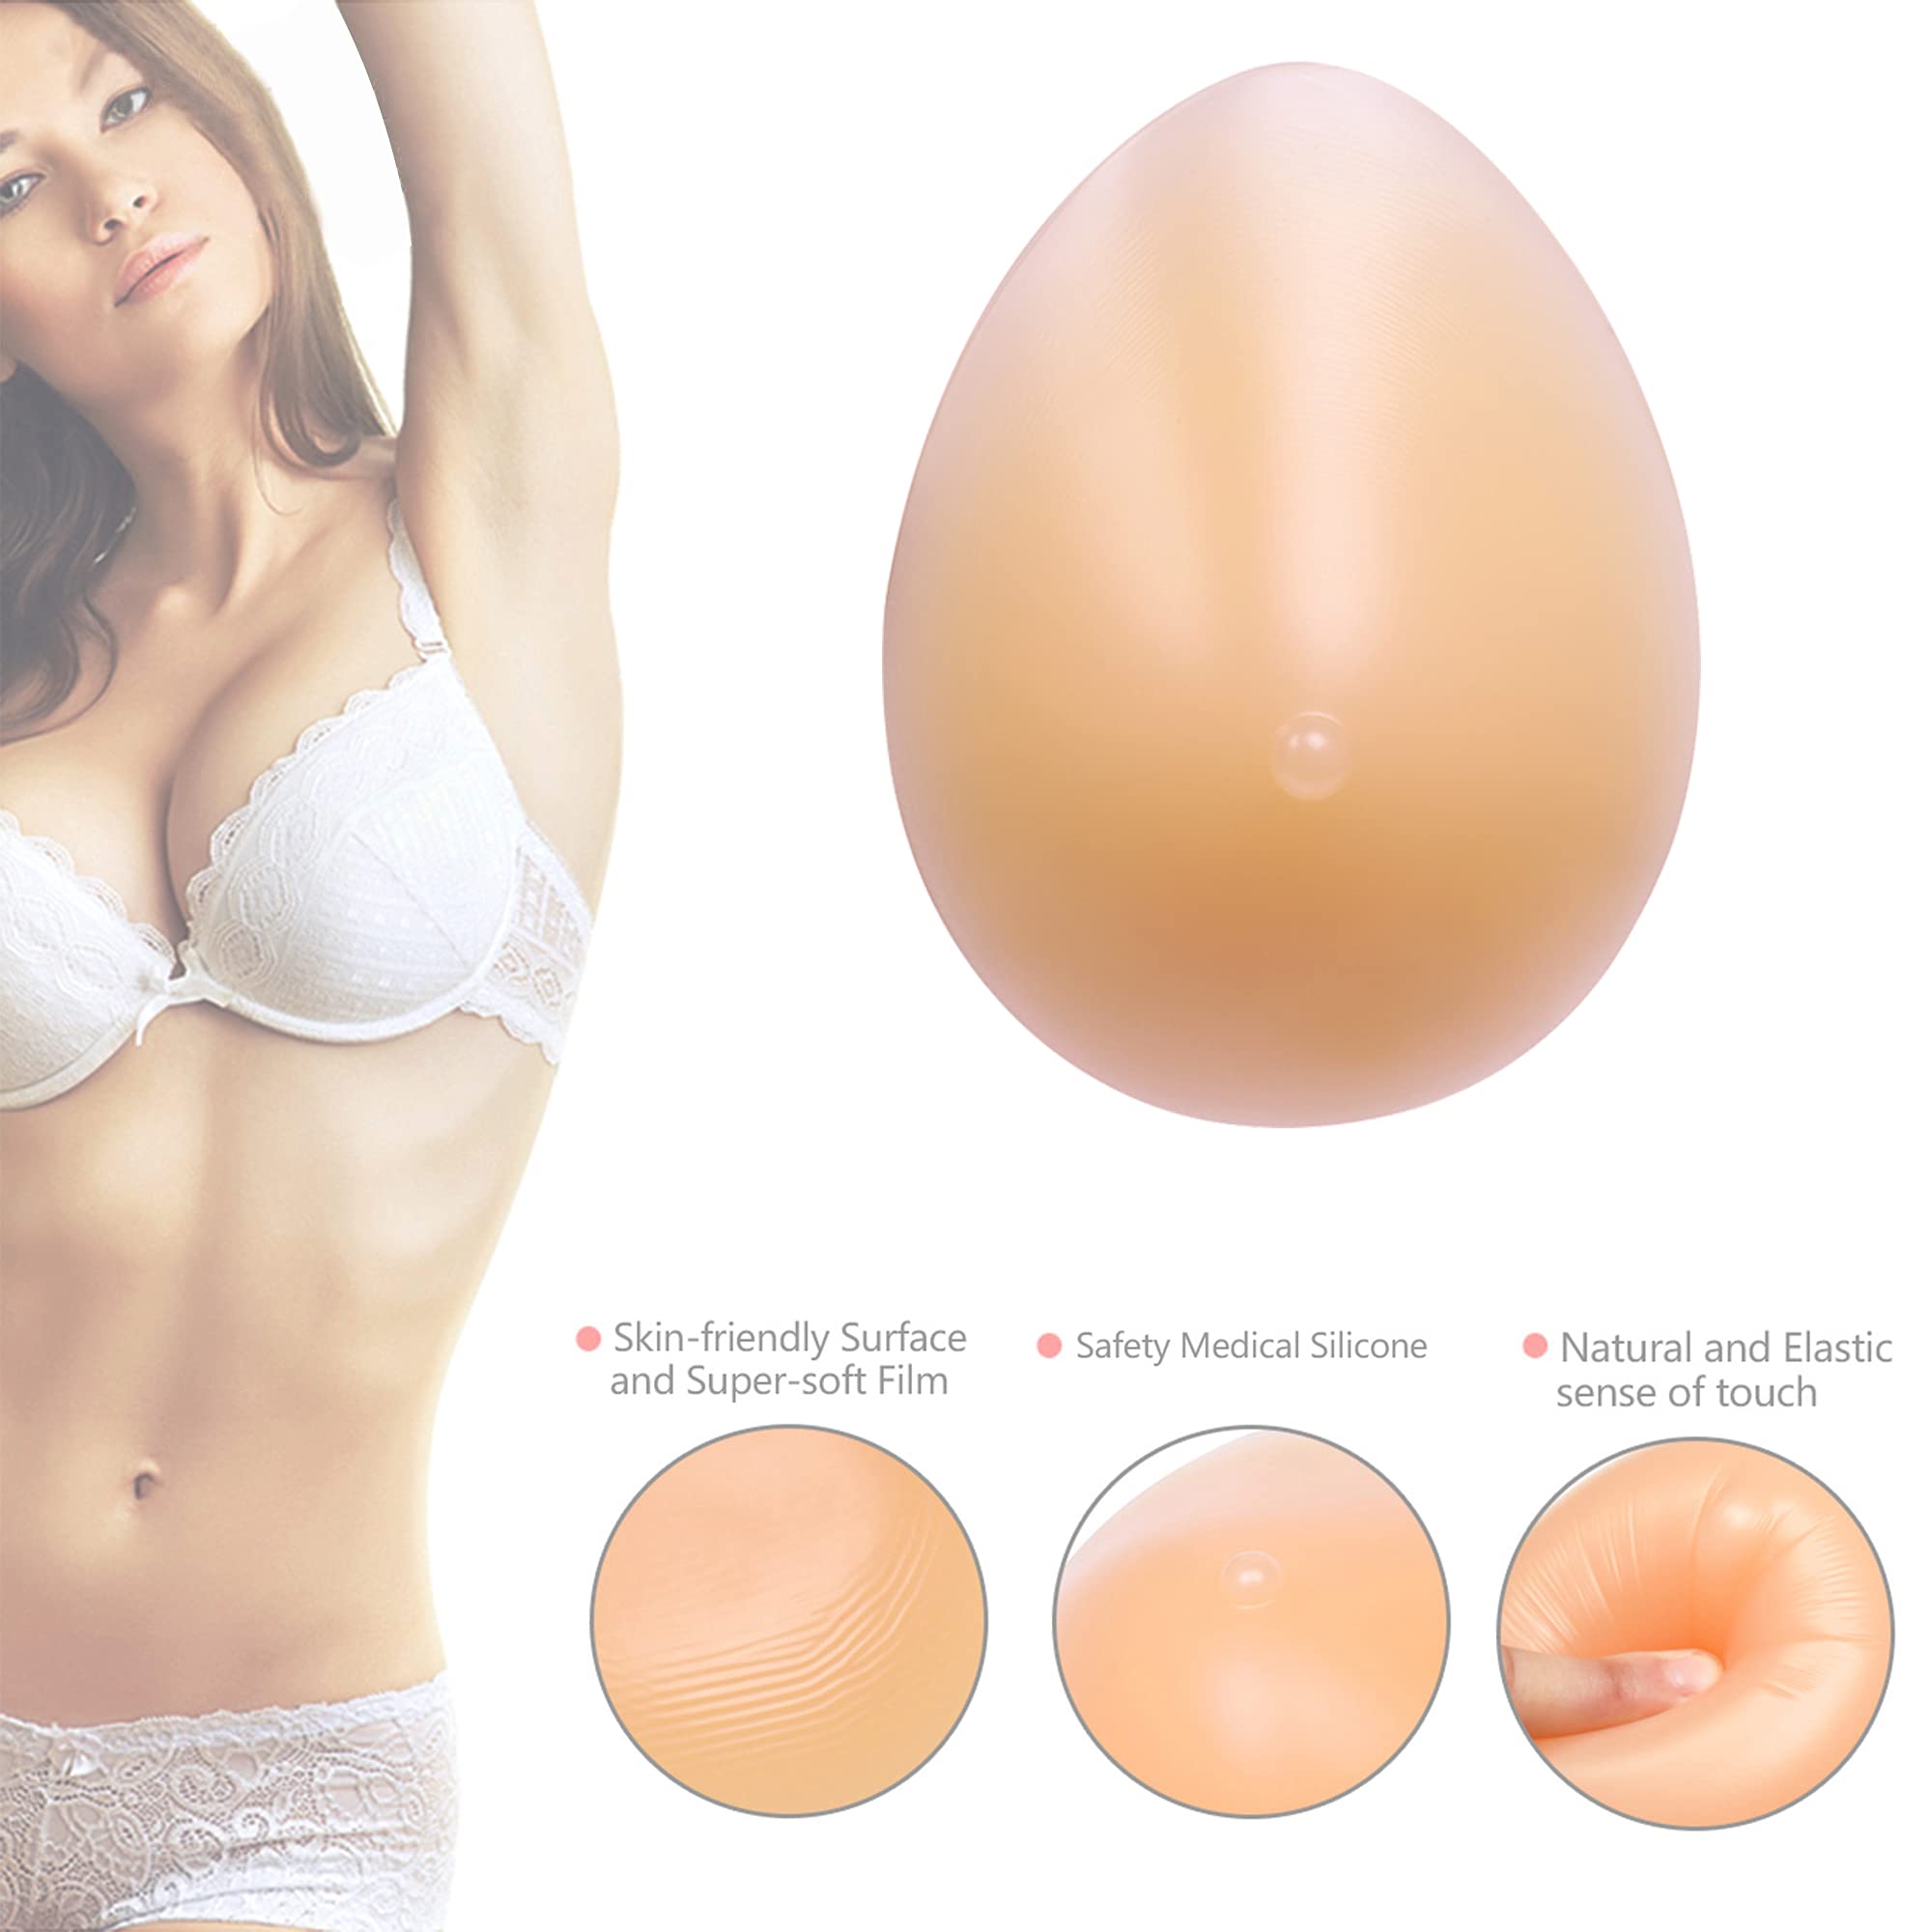 NORFULL Silicone Breast Form Mastectomy Prosthesis Waterdrop Enhancer One Piece 300g B Cup